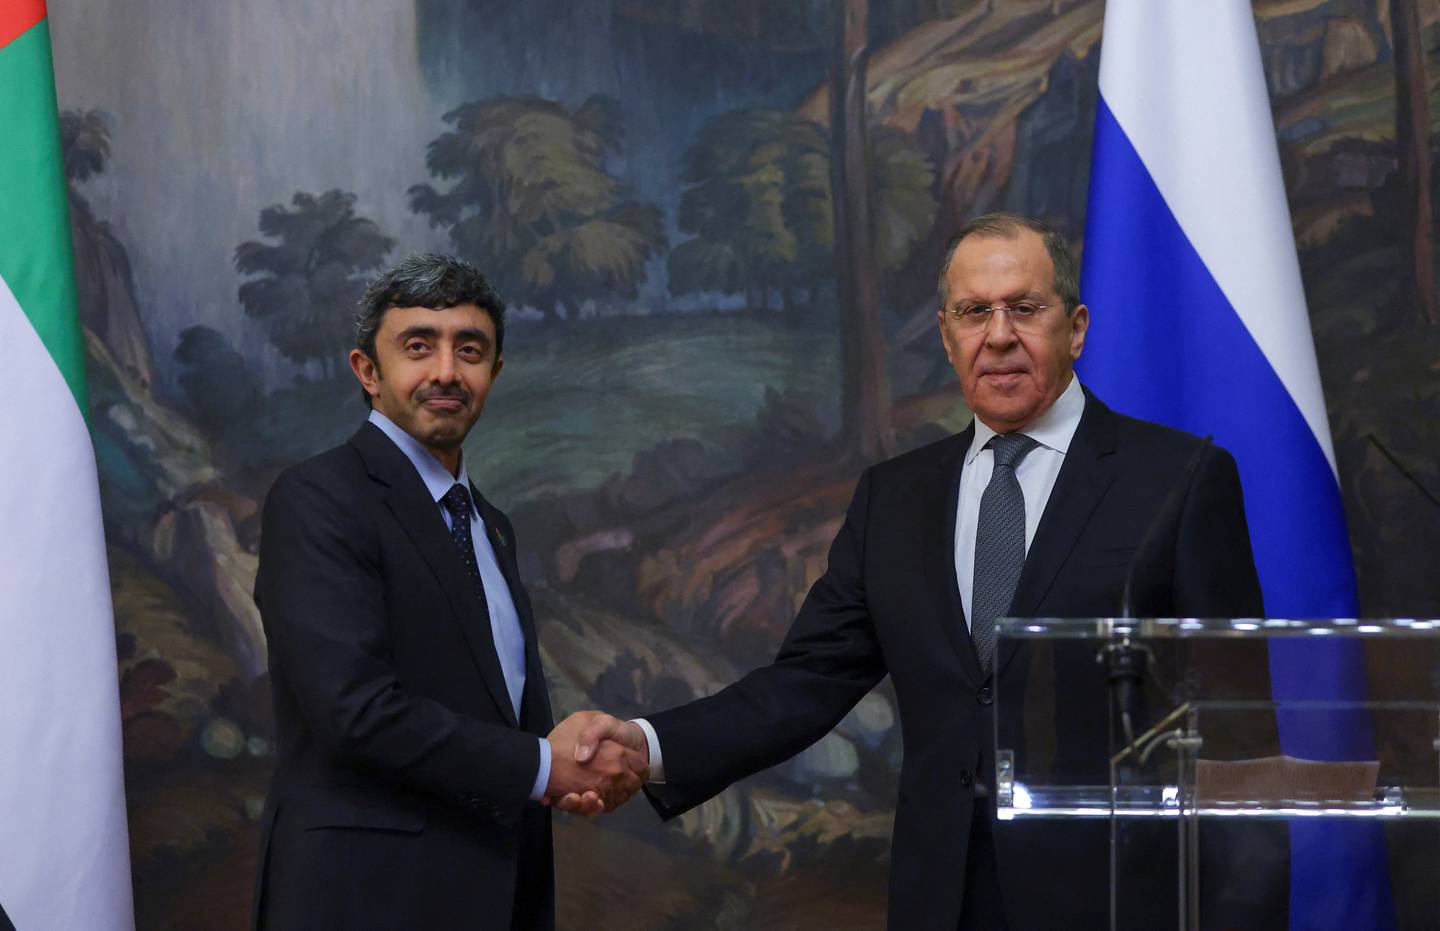 Russia's Foreign Minister Sergei Lavrov shakes hands with UAE Minister of Foreign Affairs and International Co-Operation Sheikh Abdullah bin Zayed during a news conference following their talks in Moscow.  Reuters